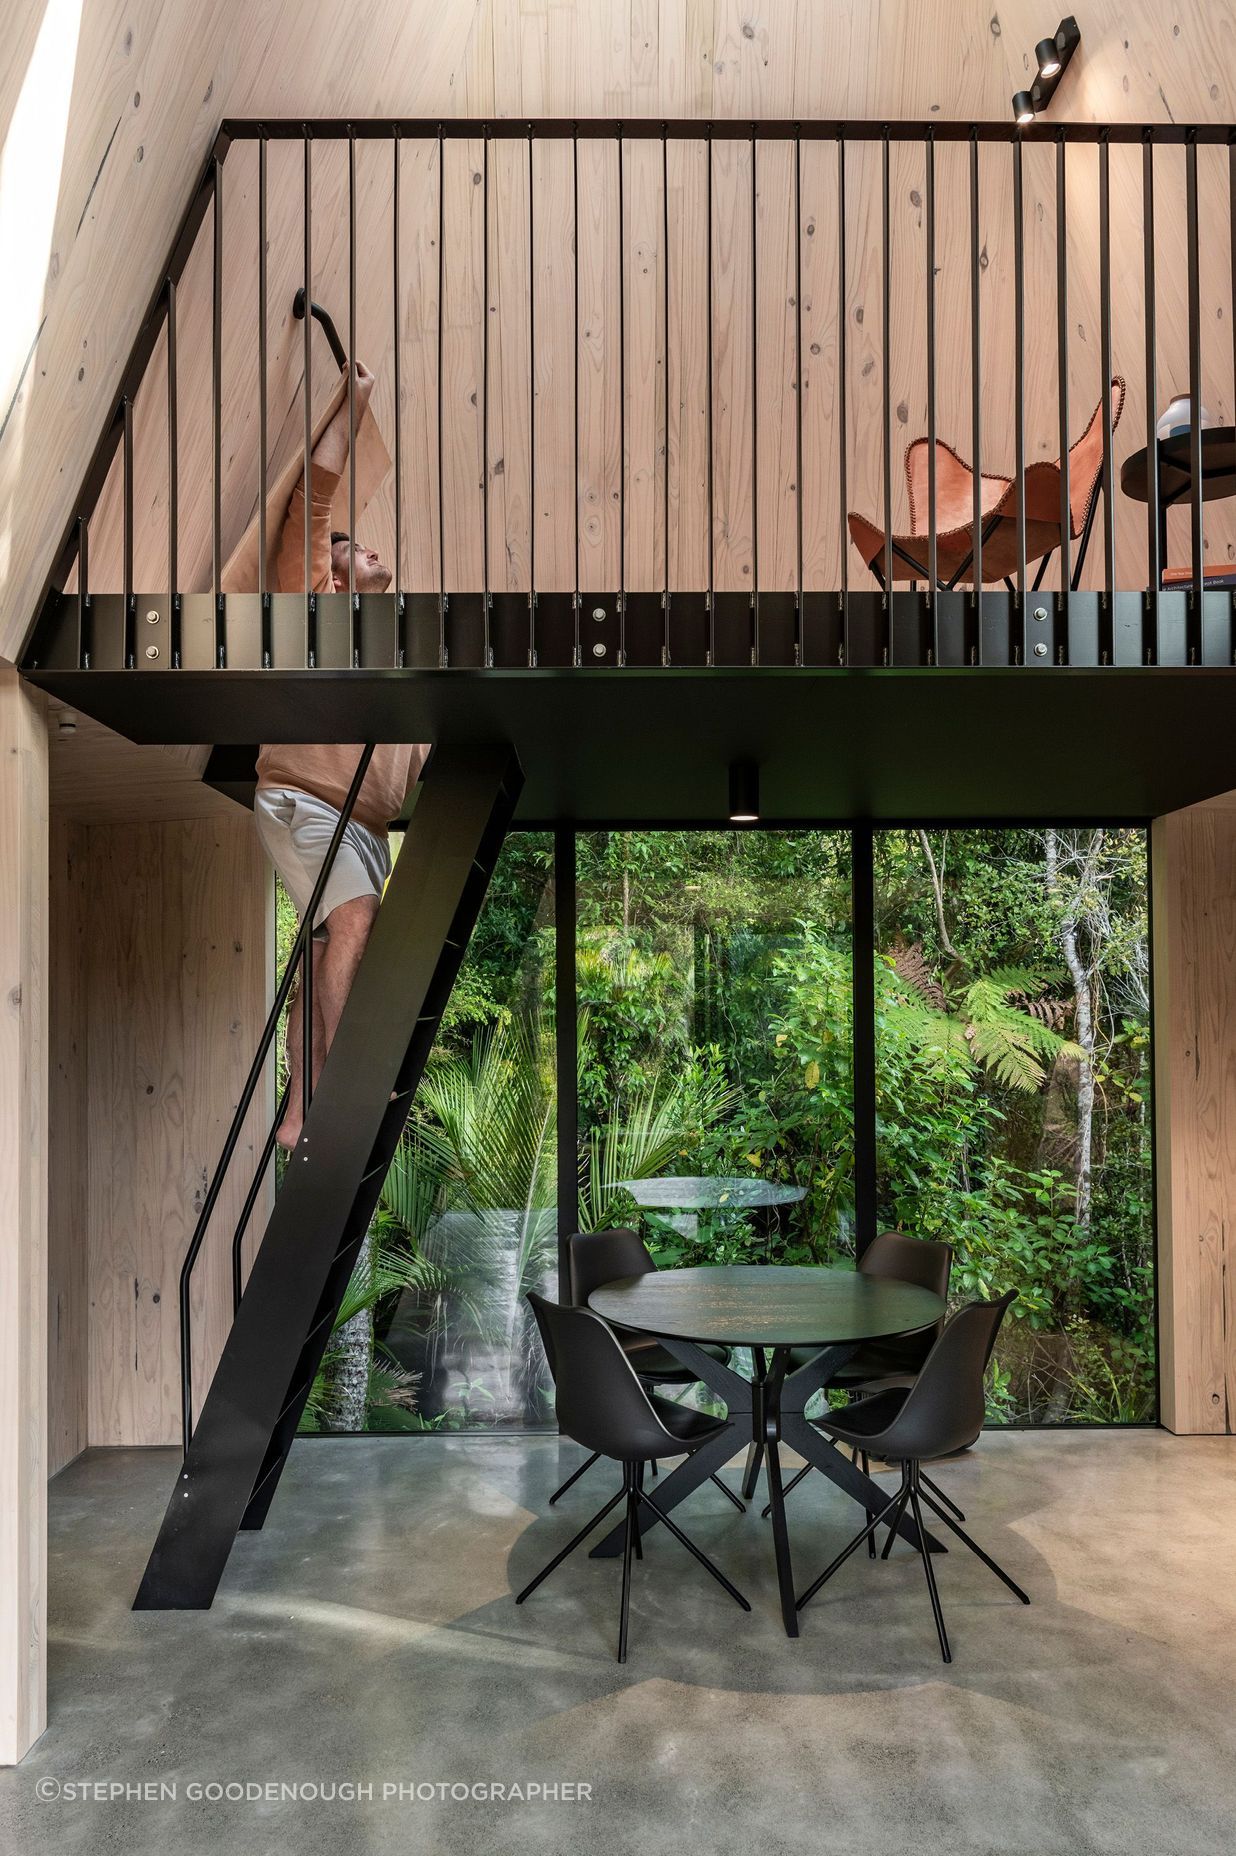 A metal structure was created on the interior, forming a clever mezzanine space.